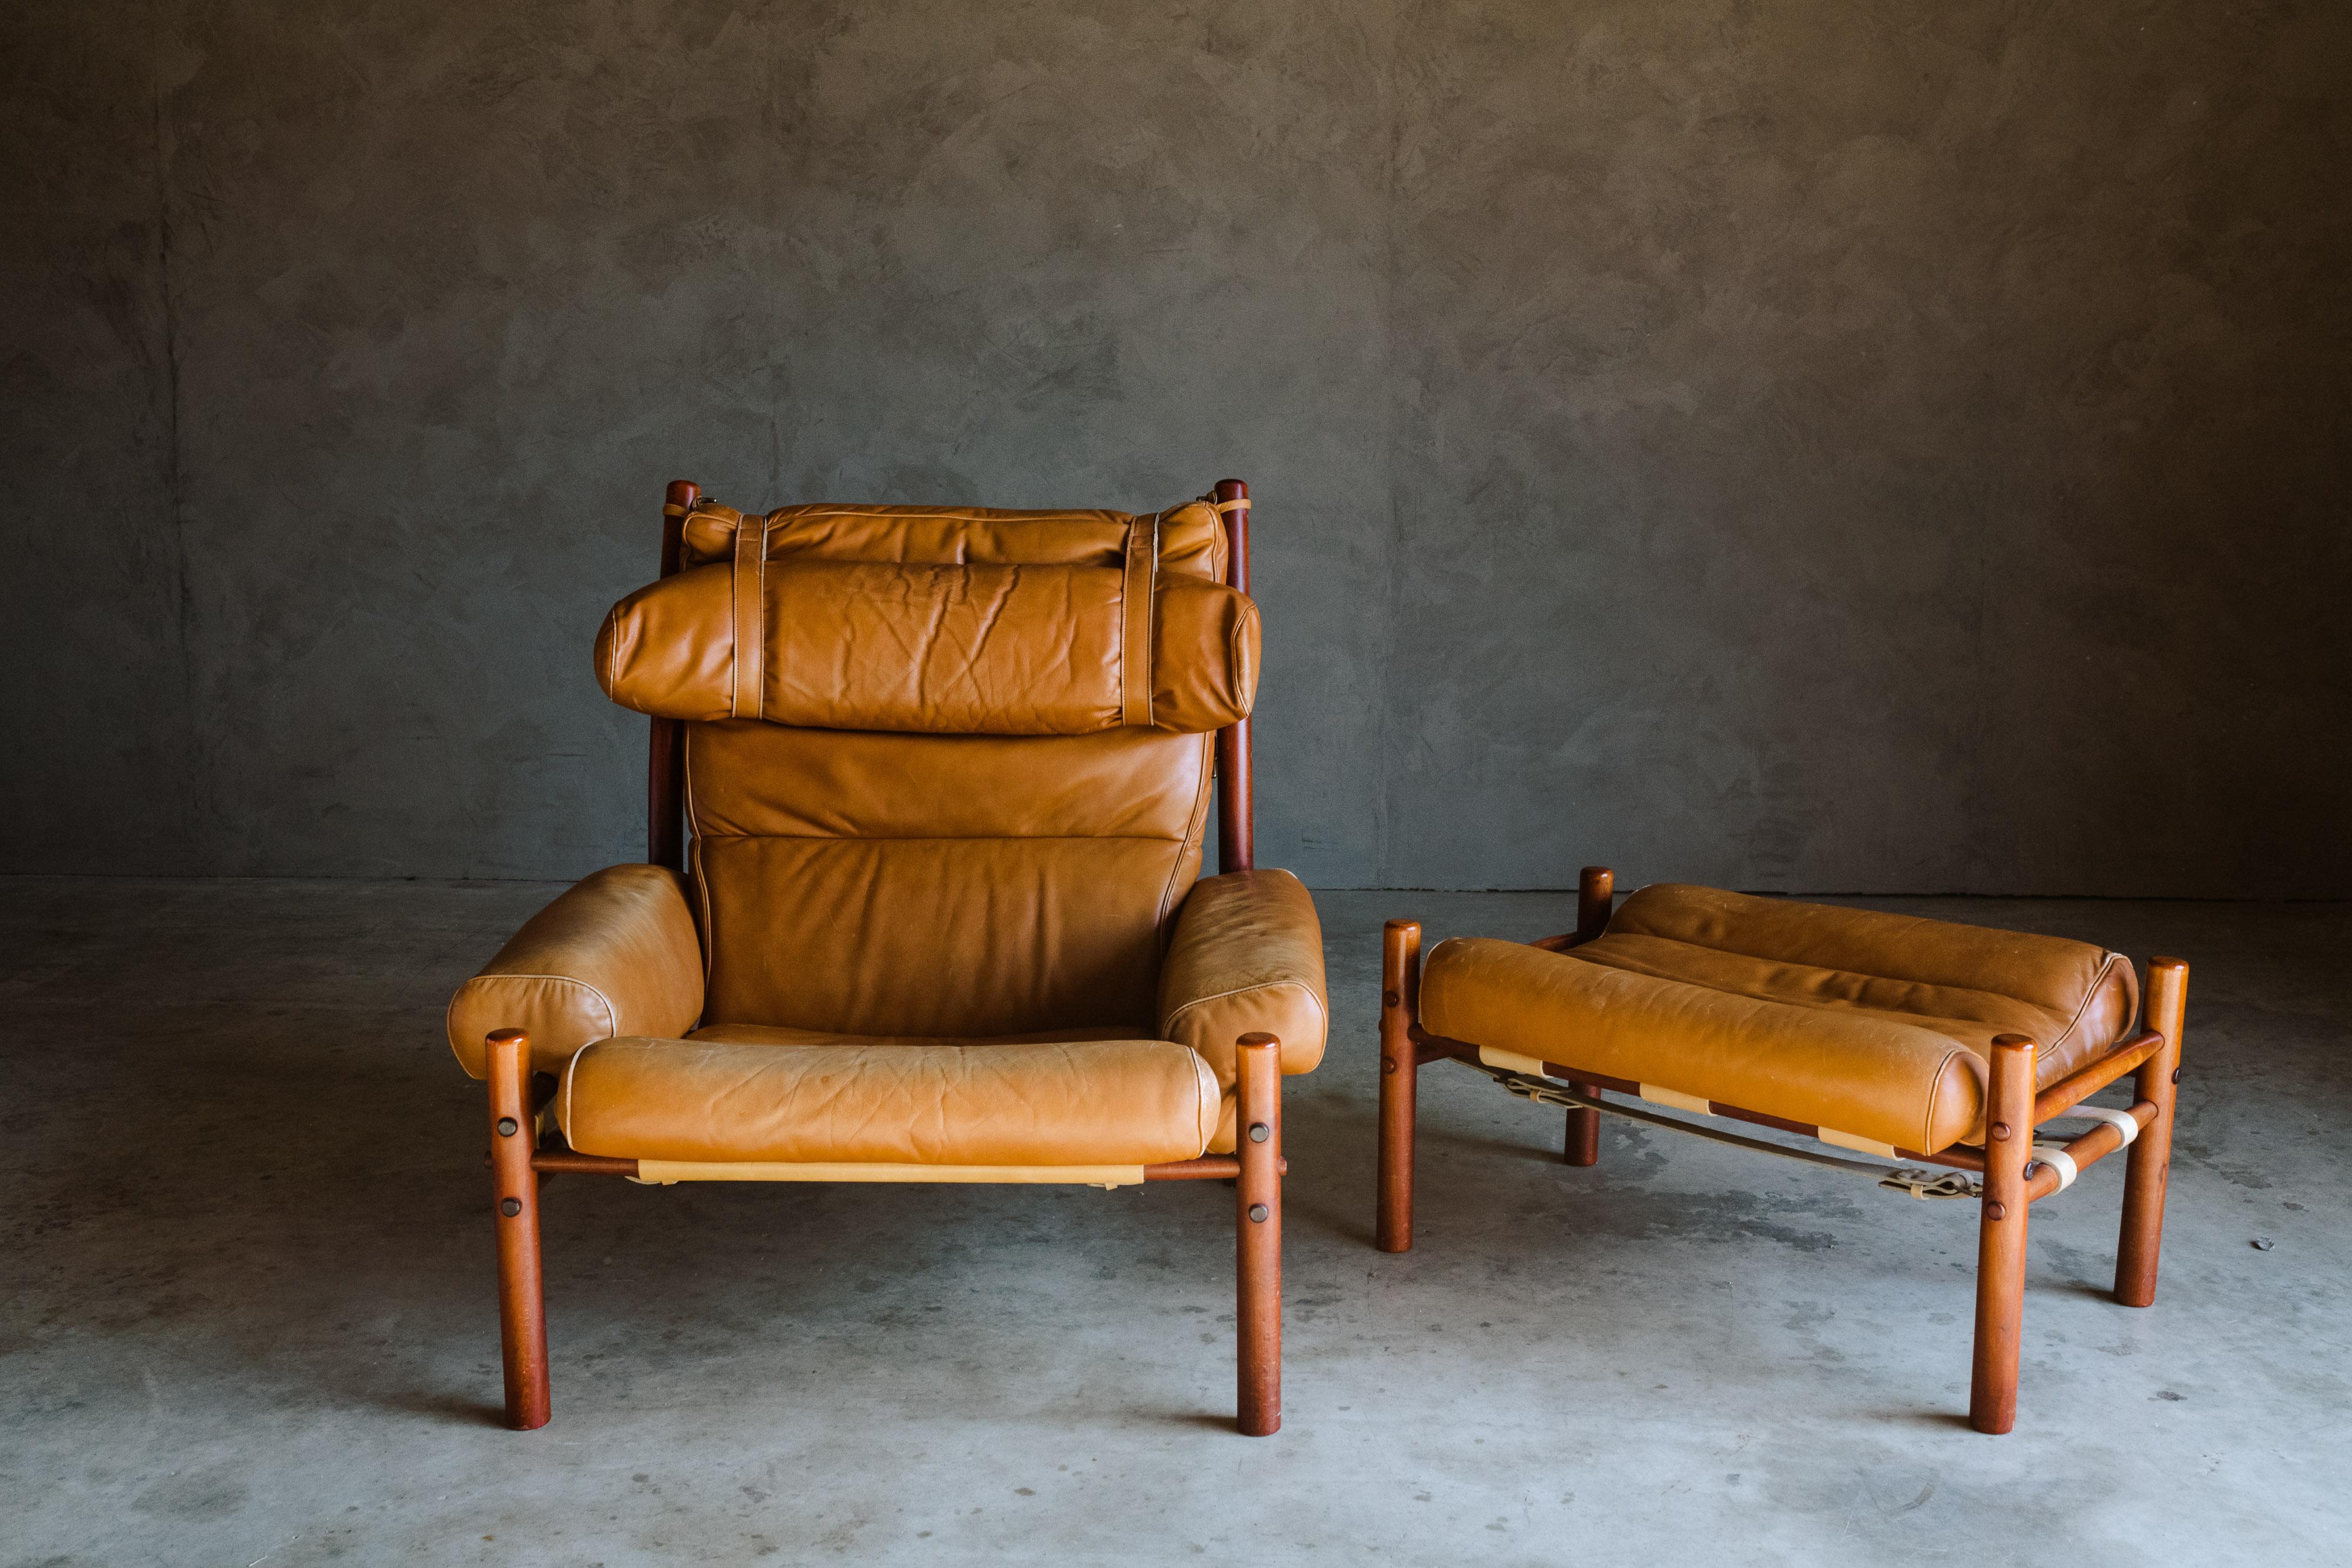 Vintage Arne Norell lounge chair and ottoman, model Inca, circa 1960. Original tan leather on a solid birch frame. Produced by Arne Norell AB, Aneby Sweden. Measures: Ottoman W 23